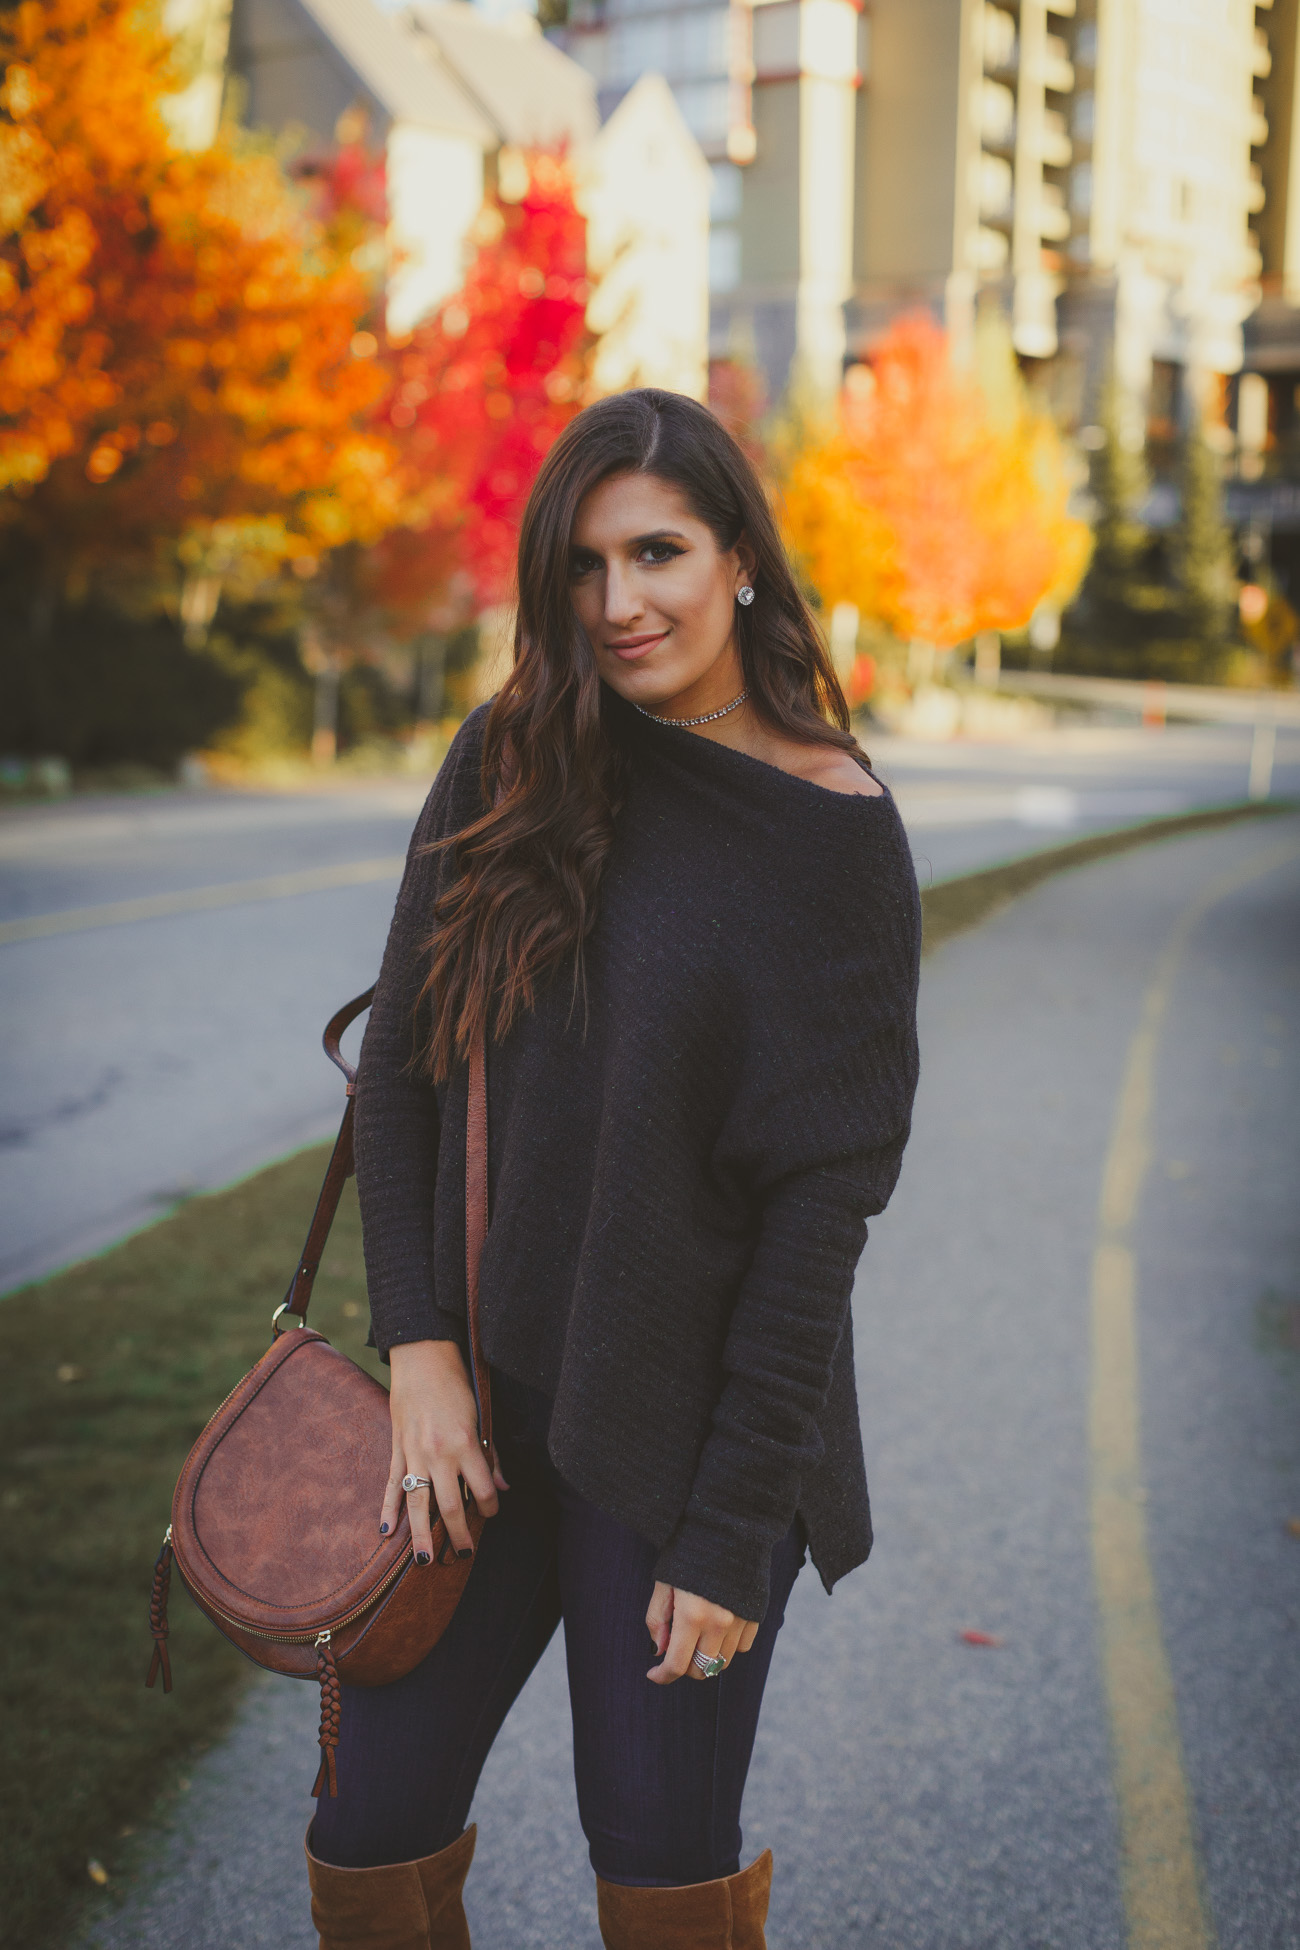 brown saddle bag, off the shoulder sweater, knit sweater, over the knee boots, dolce vita cash over the knee boot, vince camuto over the knee boot, vince camuto melaya over the knee boot, fall outfit, fall fashion, fall style // grace wainwright a southern drawl